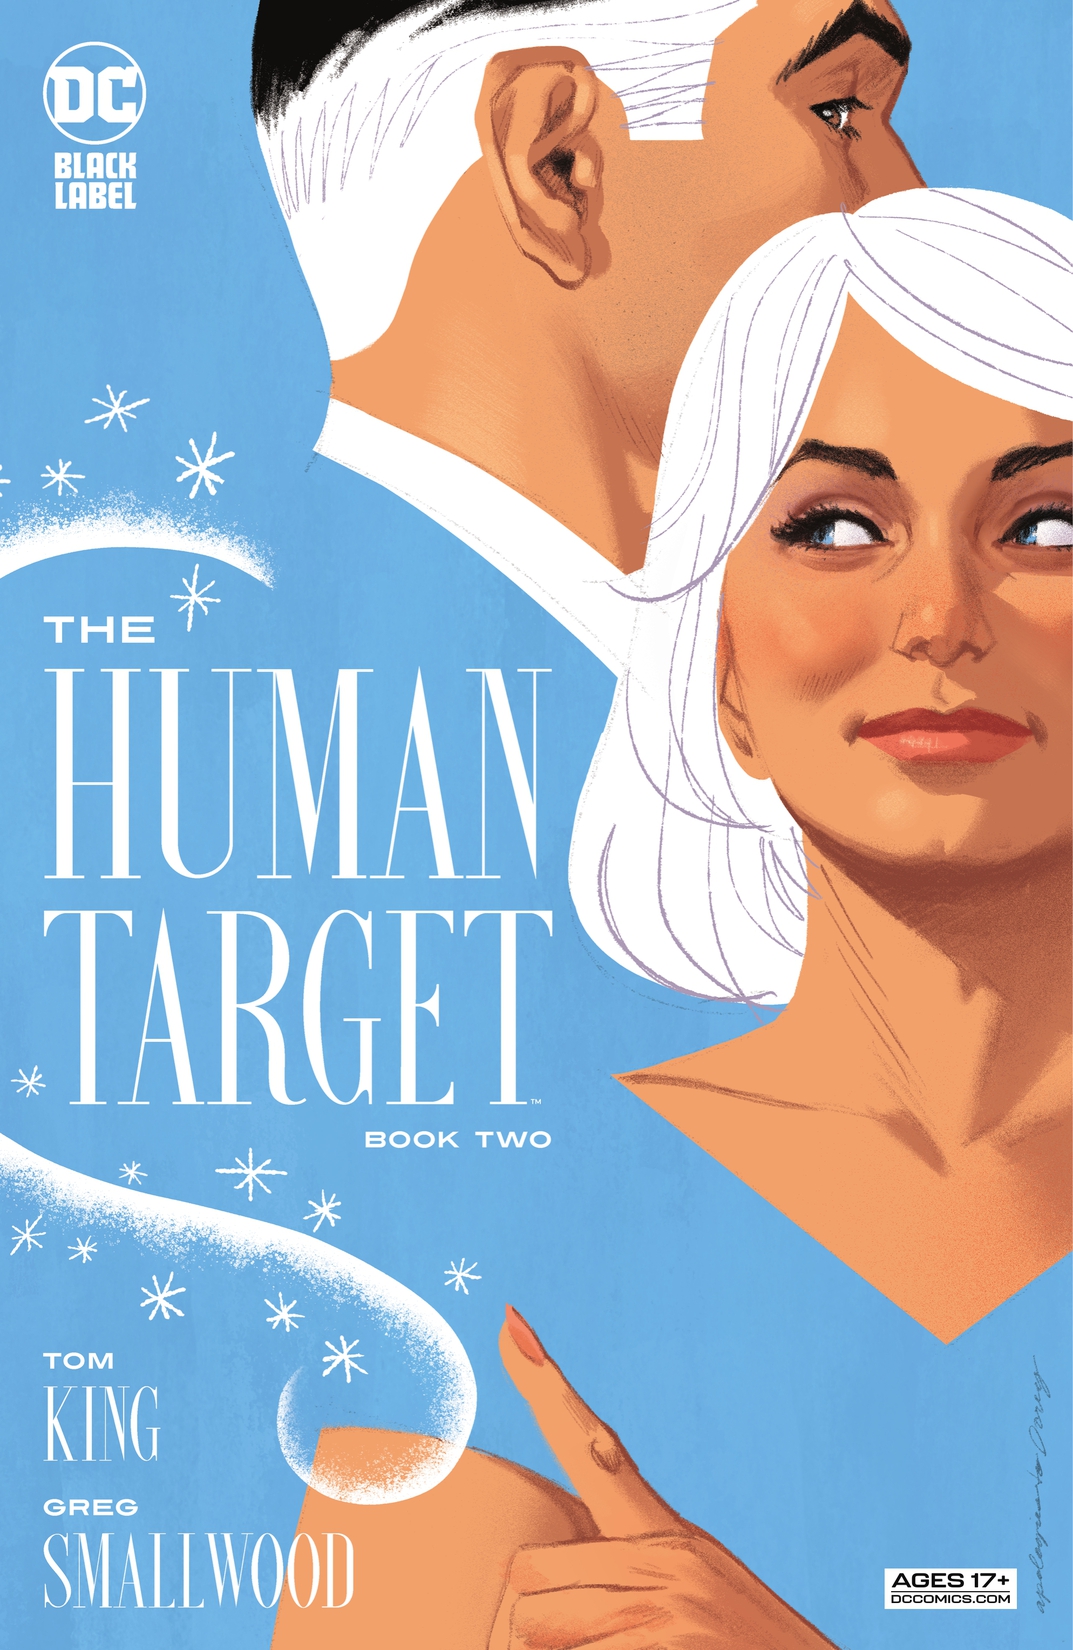 The Human Target #2 preview images